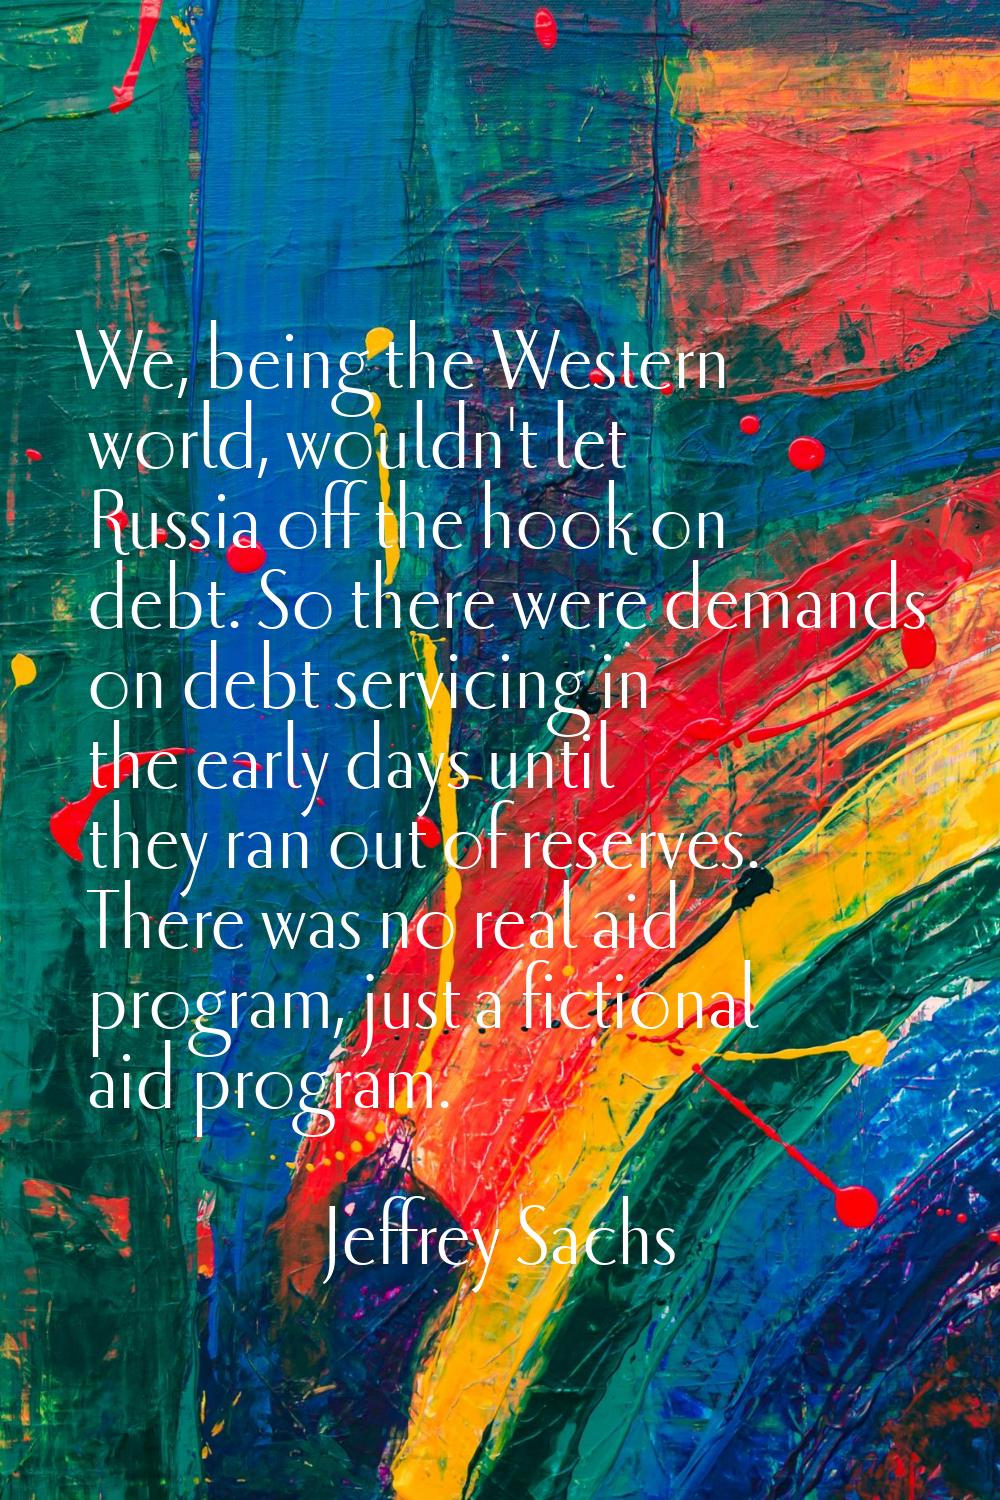 We, being the Western world, wouldn't let Russia off the hook on debt. So there were demands on deb